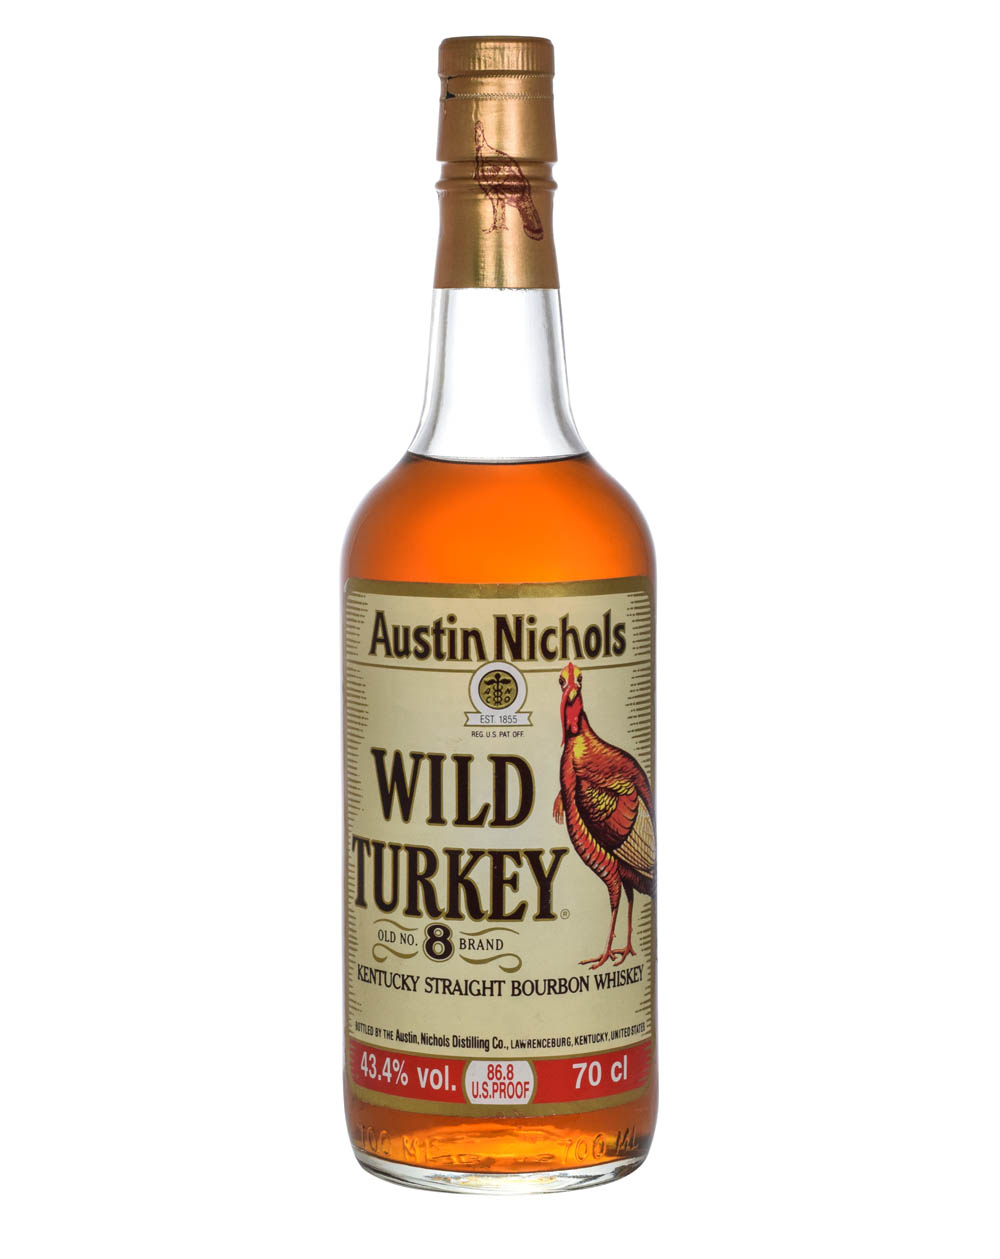 Wild Turkey Old No. 8 Brand 86.6 Proof 1993 Must Have Malts MHM